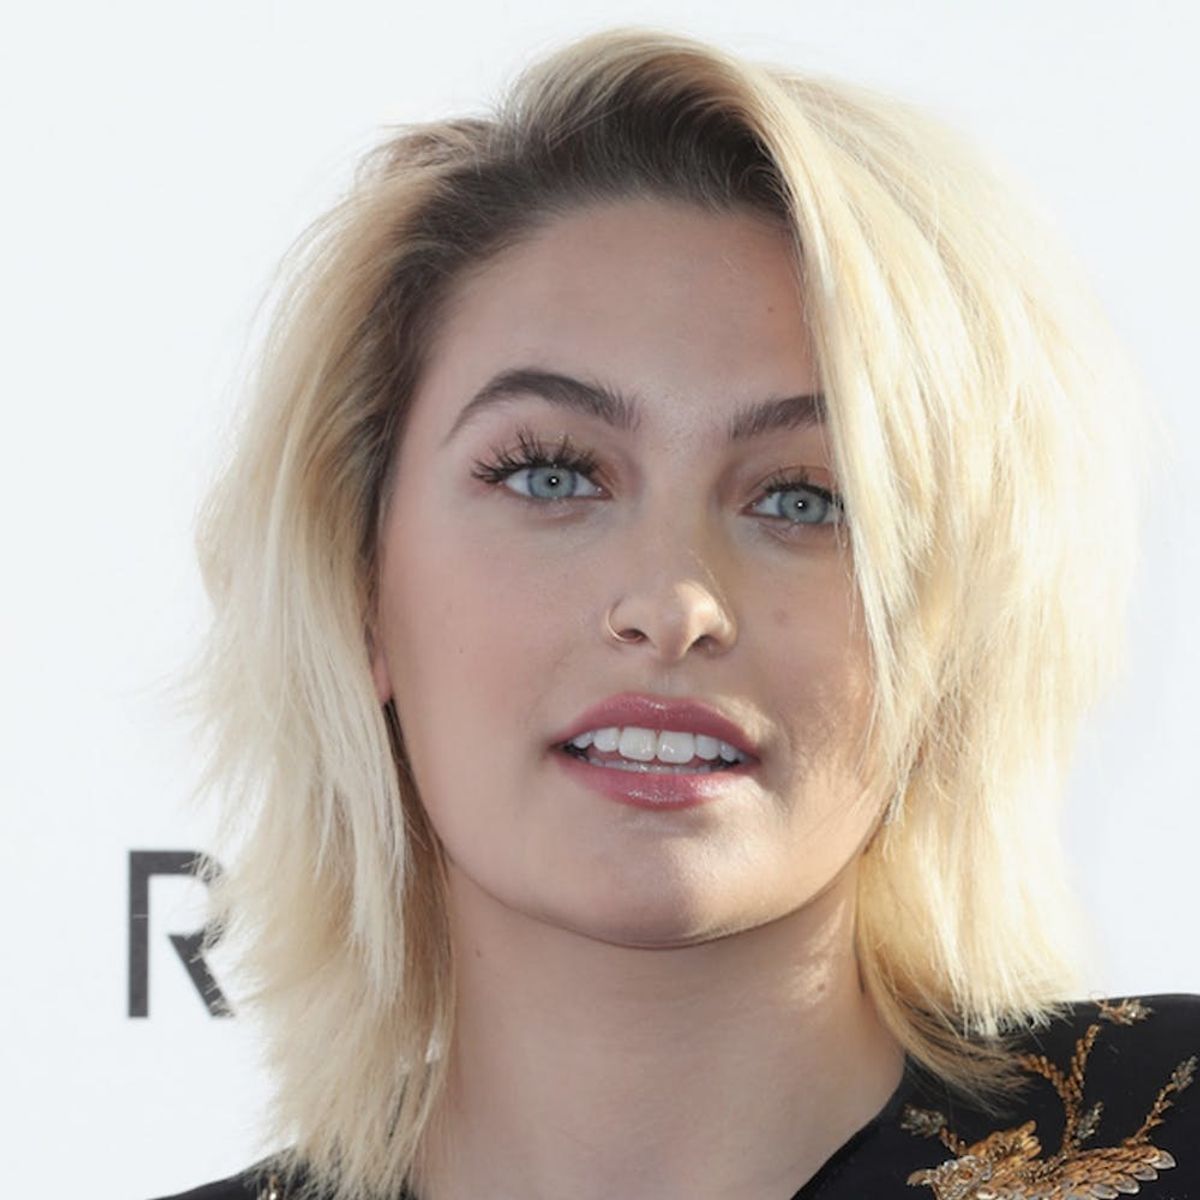 Paris Jackson Likes to Go Barefoot at Award Shows and Who Can Really Blame Her?